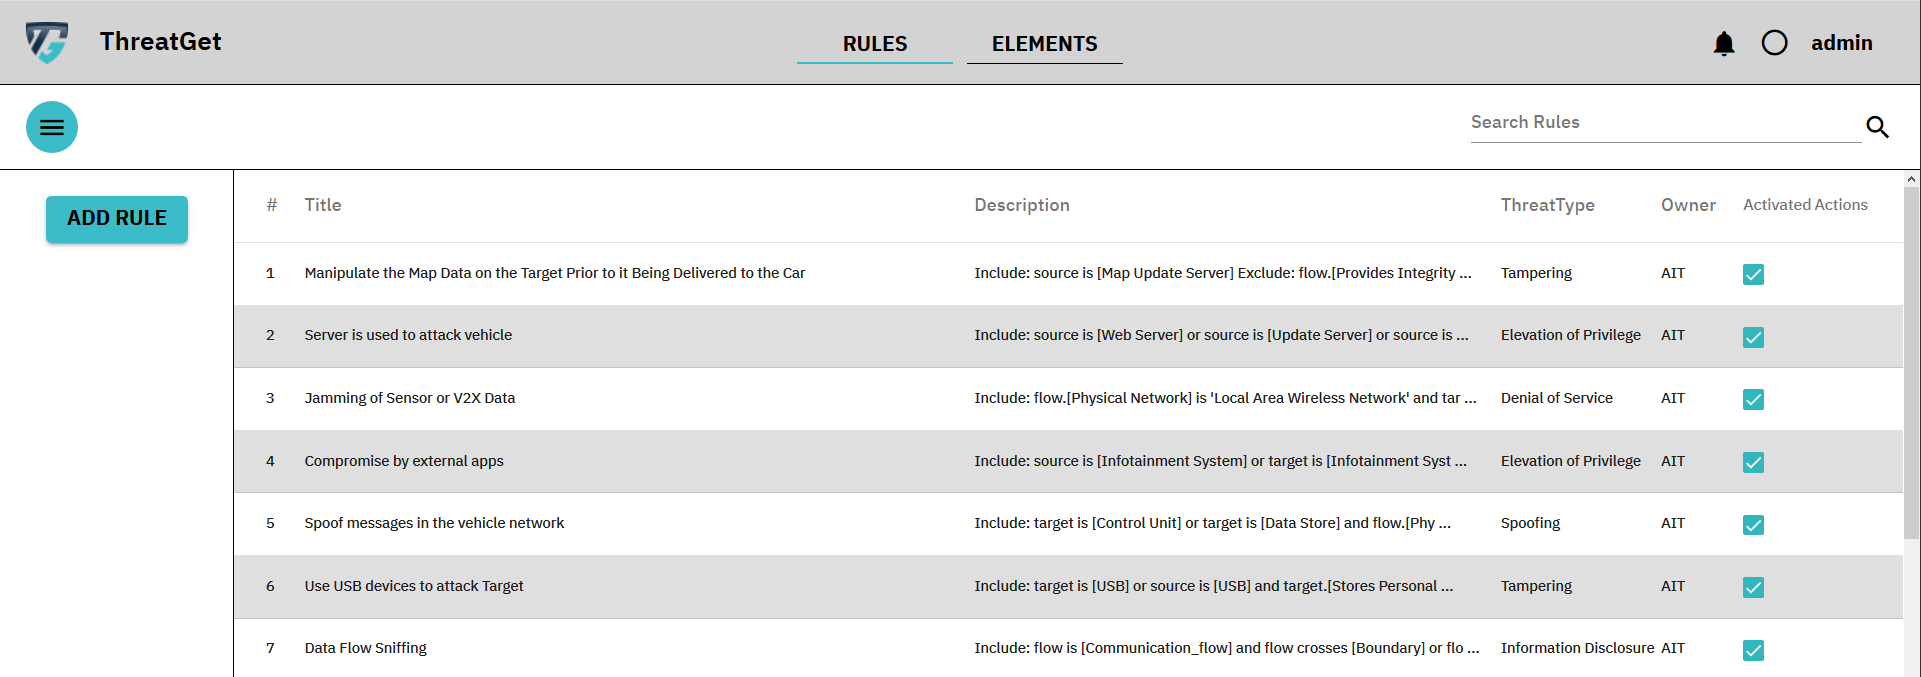 Rules overview screen with all defined rules